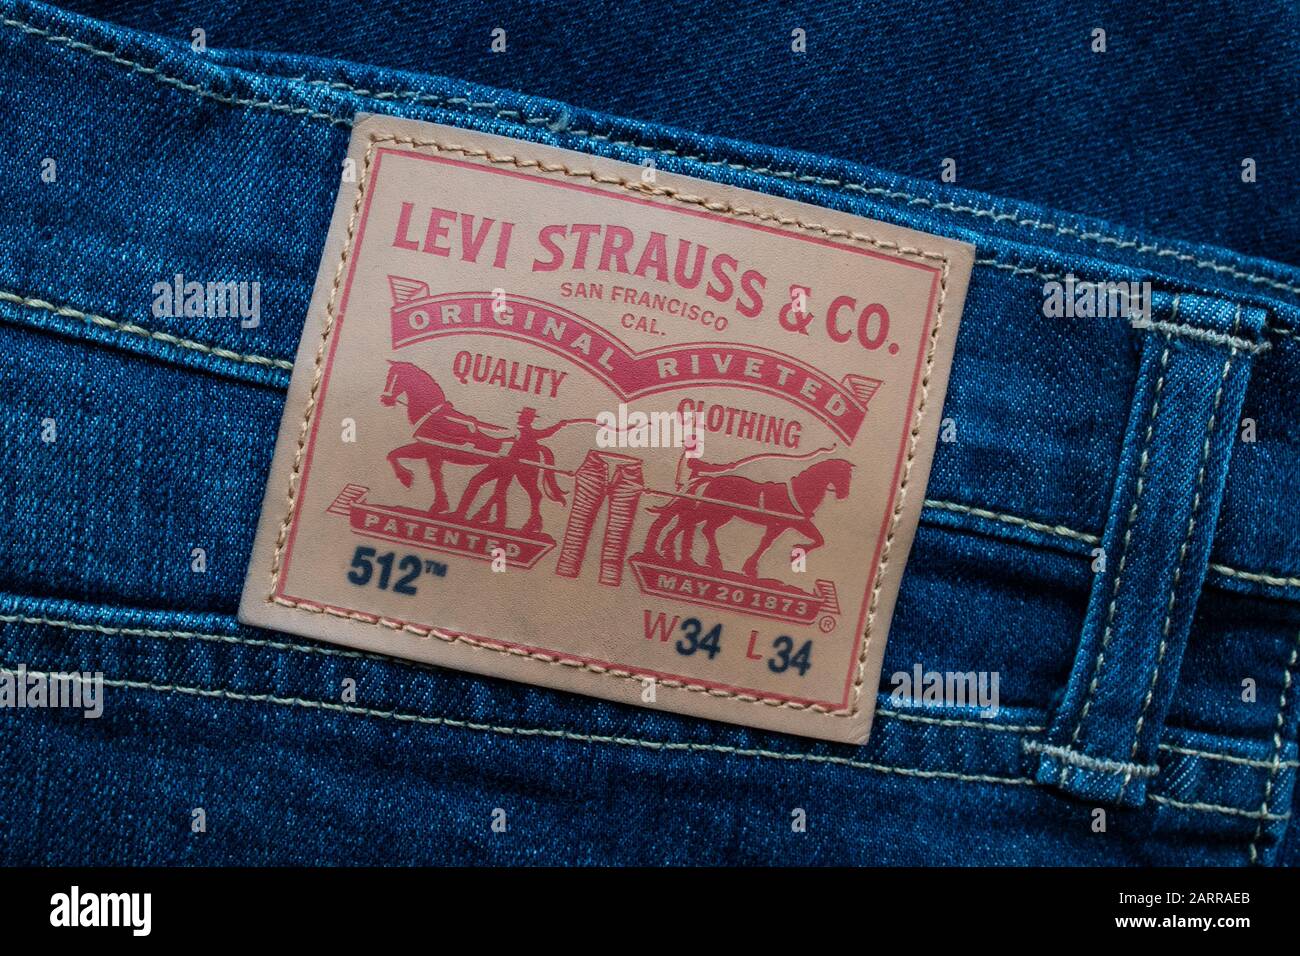 co jeans label Stock Photo -